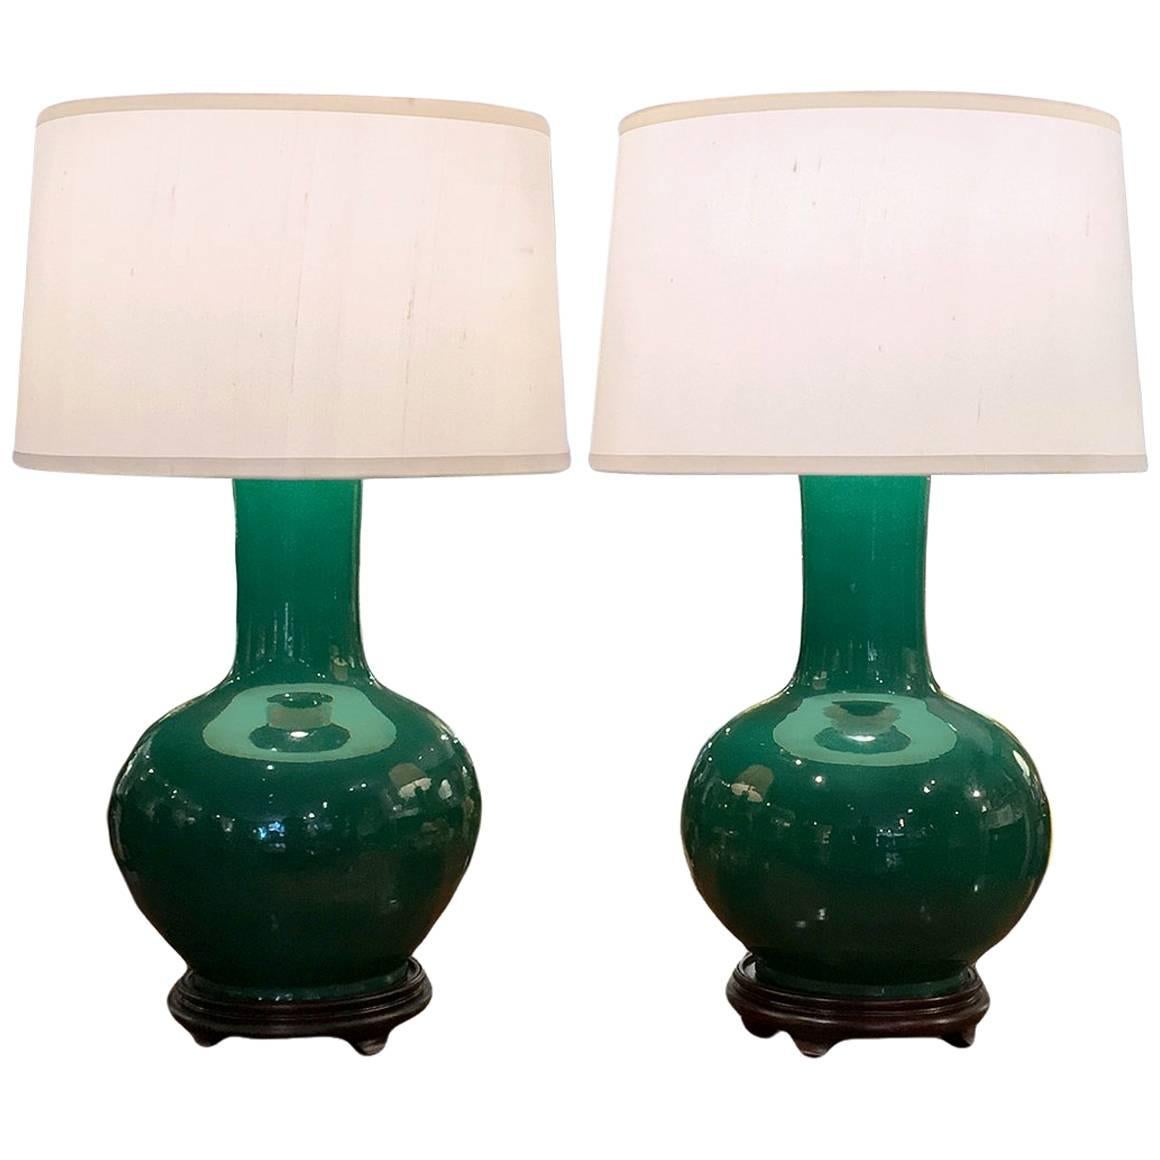 Pair of Chinese Green Tianqiuping Vases, Wired as Lamps